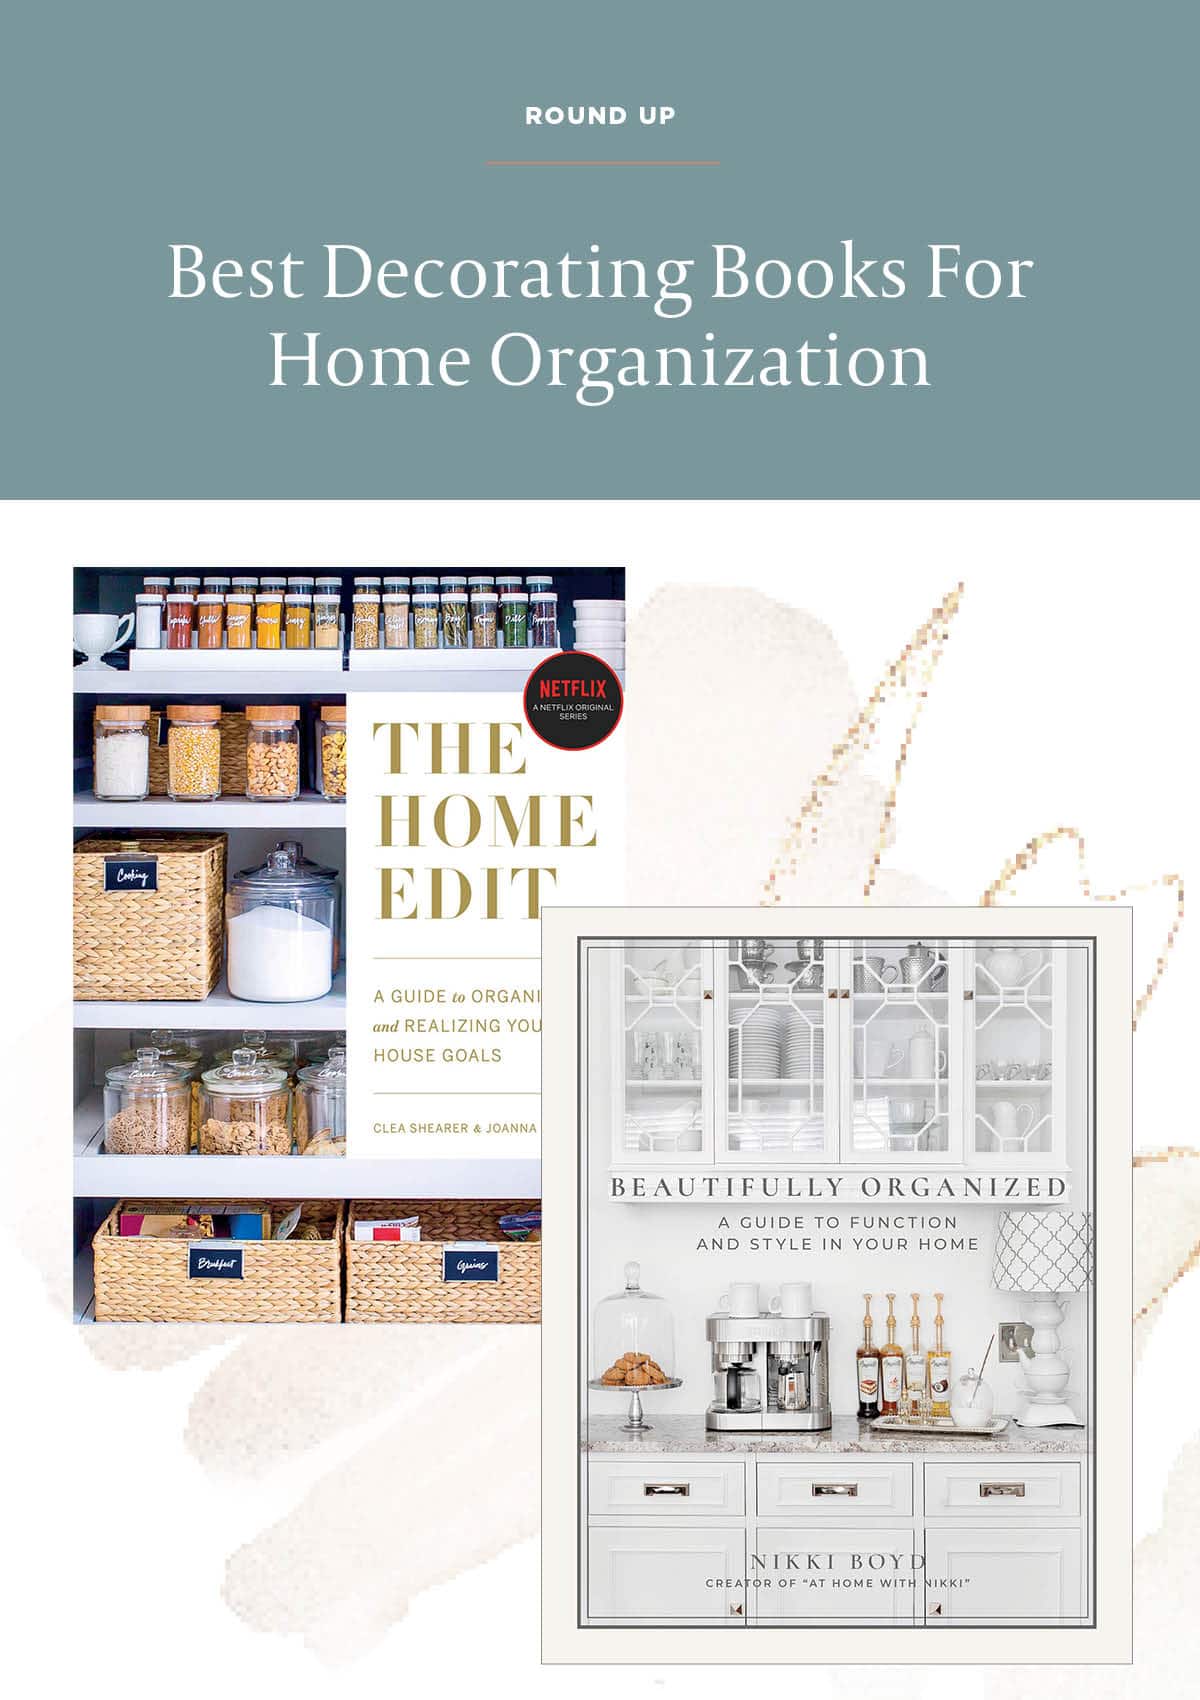 Beautifully Organized: A Guide to Function, Style & Home